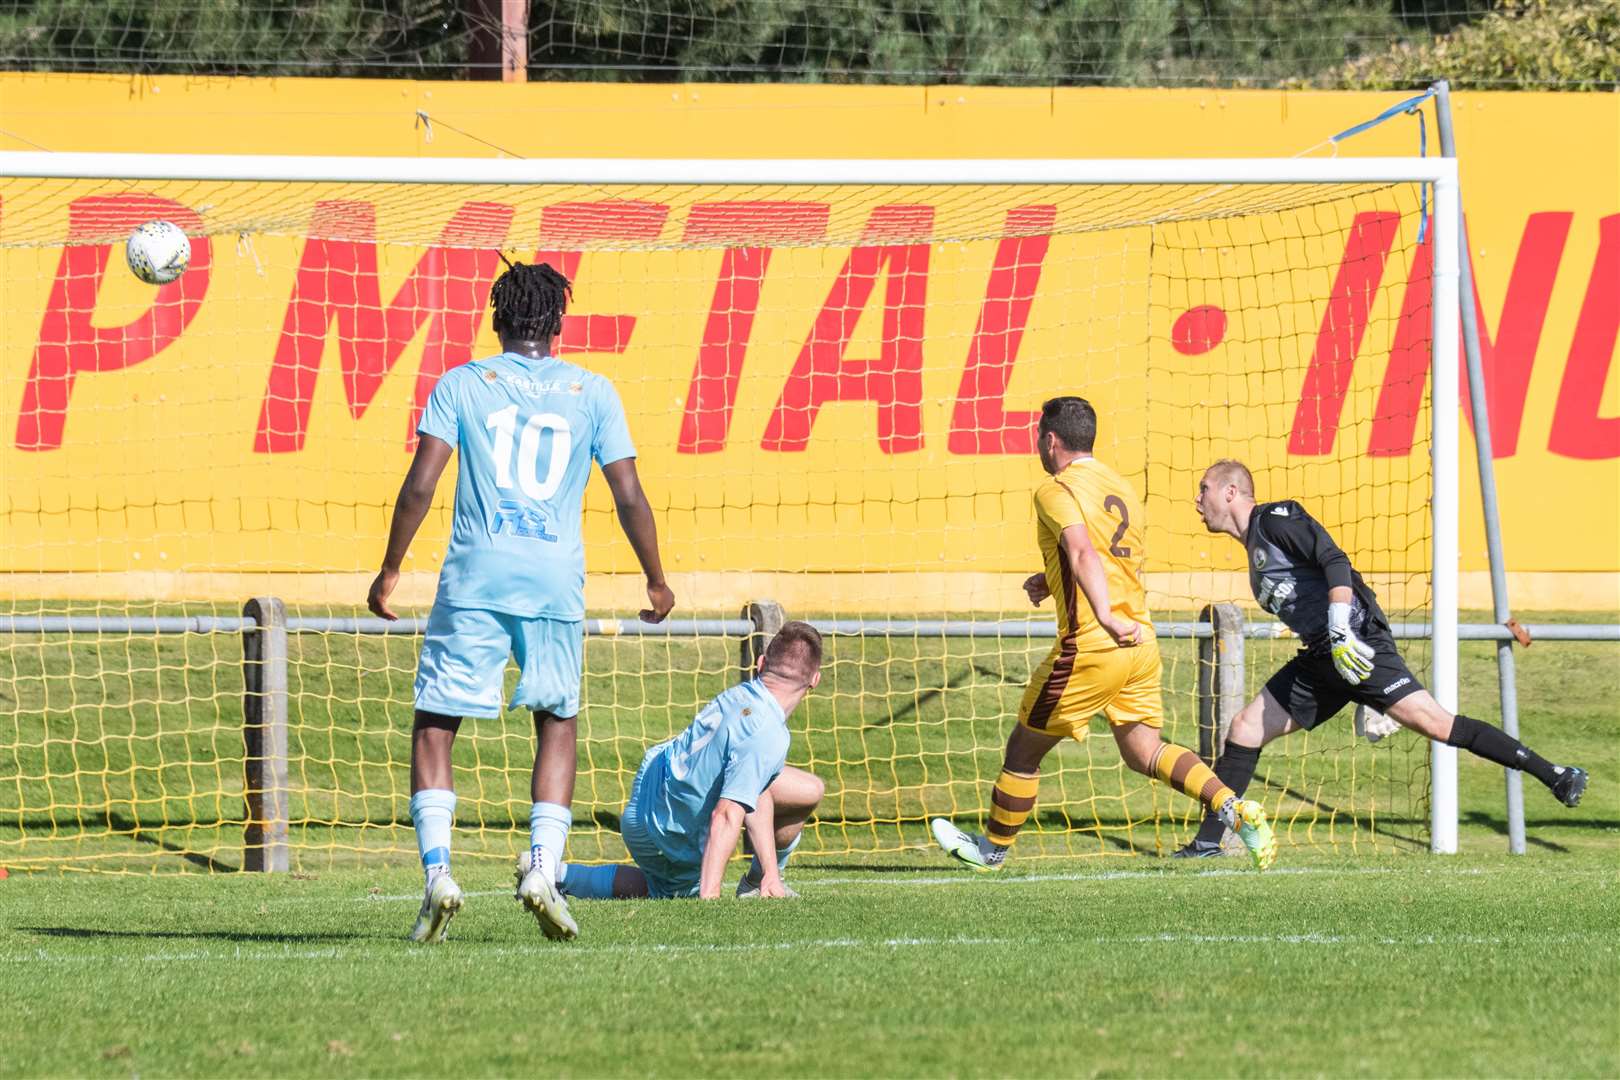 Keith forward Przemyslaw Nawrocki scores the second goal of the afternoon for the visitors. ..Forres Mechanics FC (1) vs Keith FC (2) - Highland Football League 22/23 - Mosset Park, Forres 27/08/2022...Picture: Daniel Forsyth..